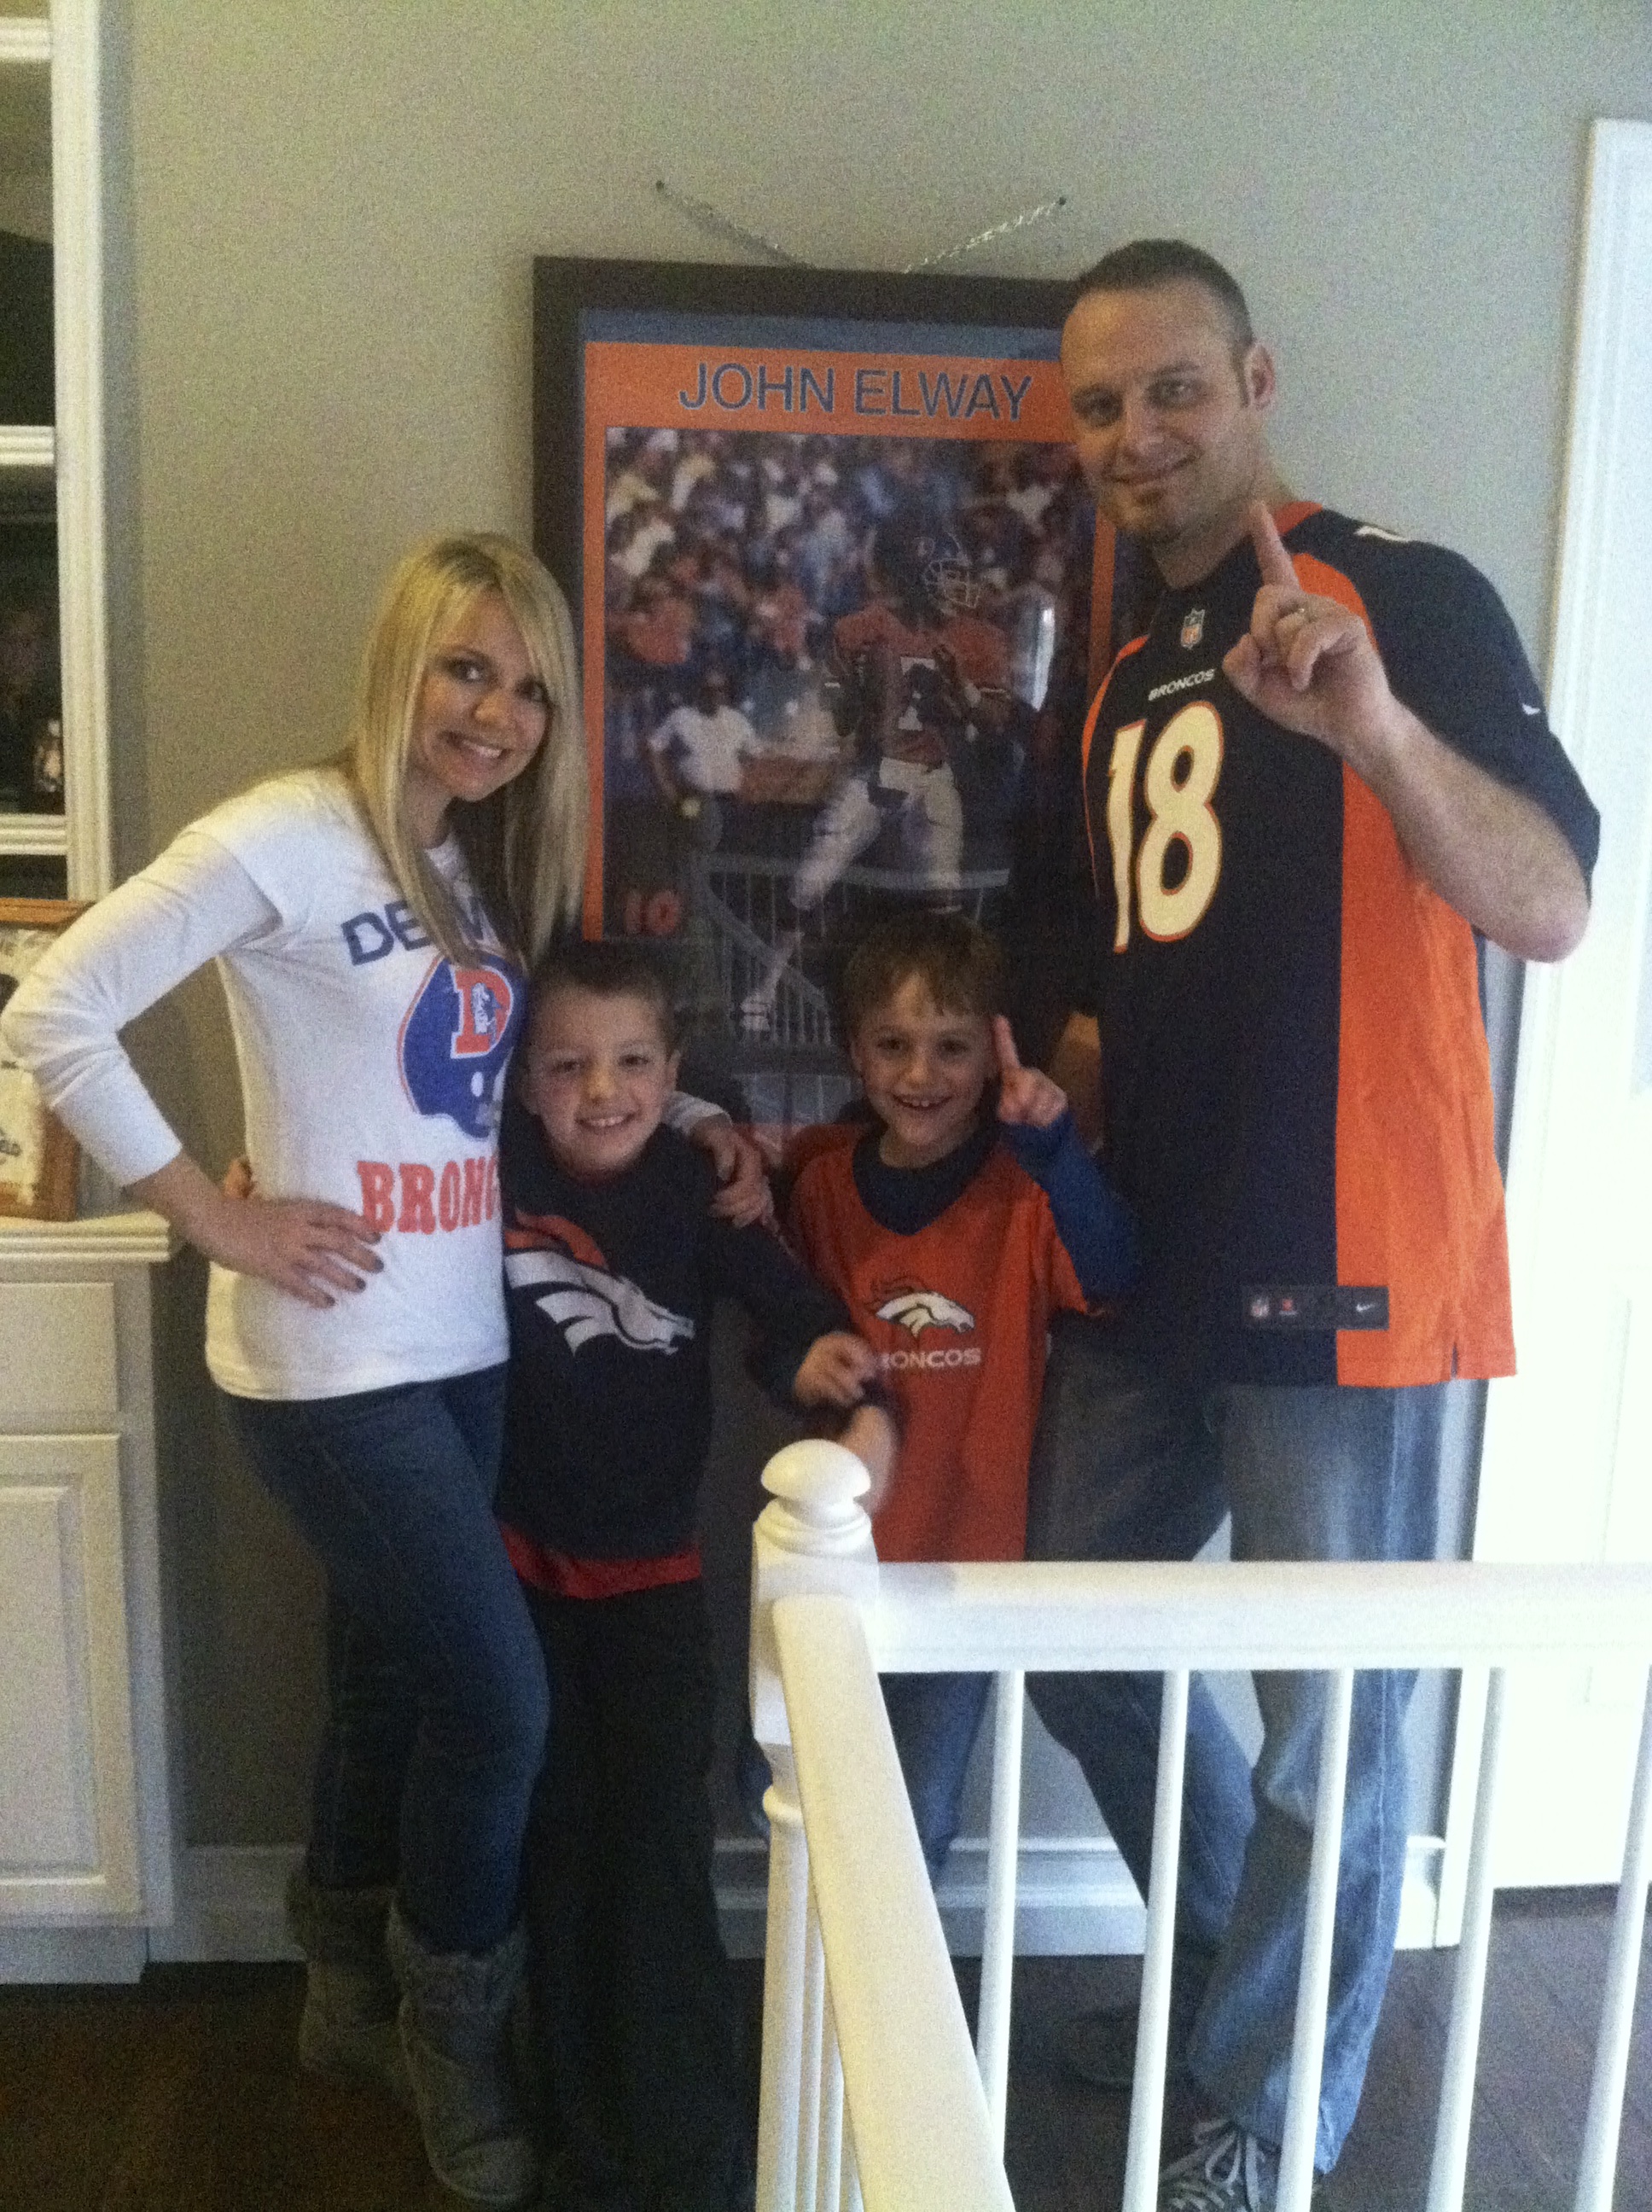 PHOTO: Broncos Fan Whose House Was Listed for Sale In Prank Vows Revenge